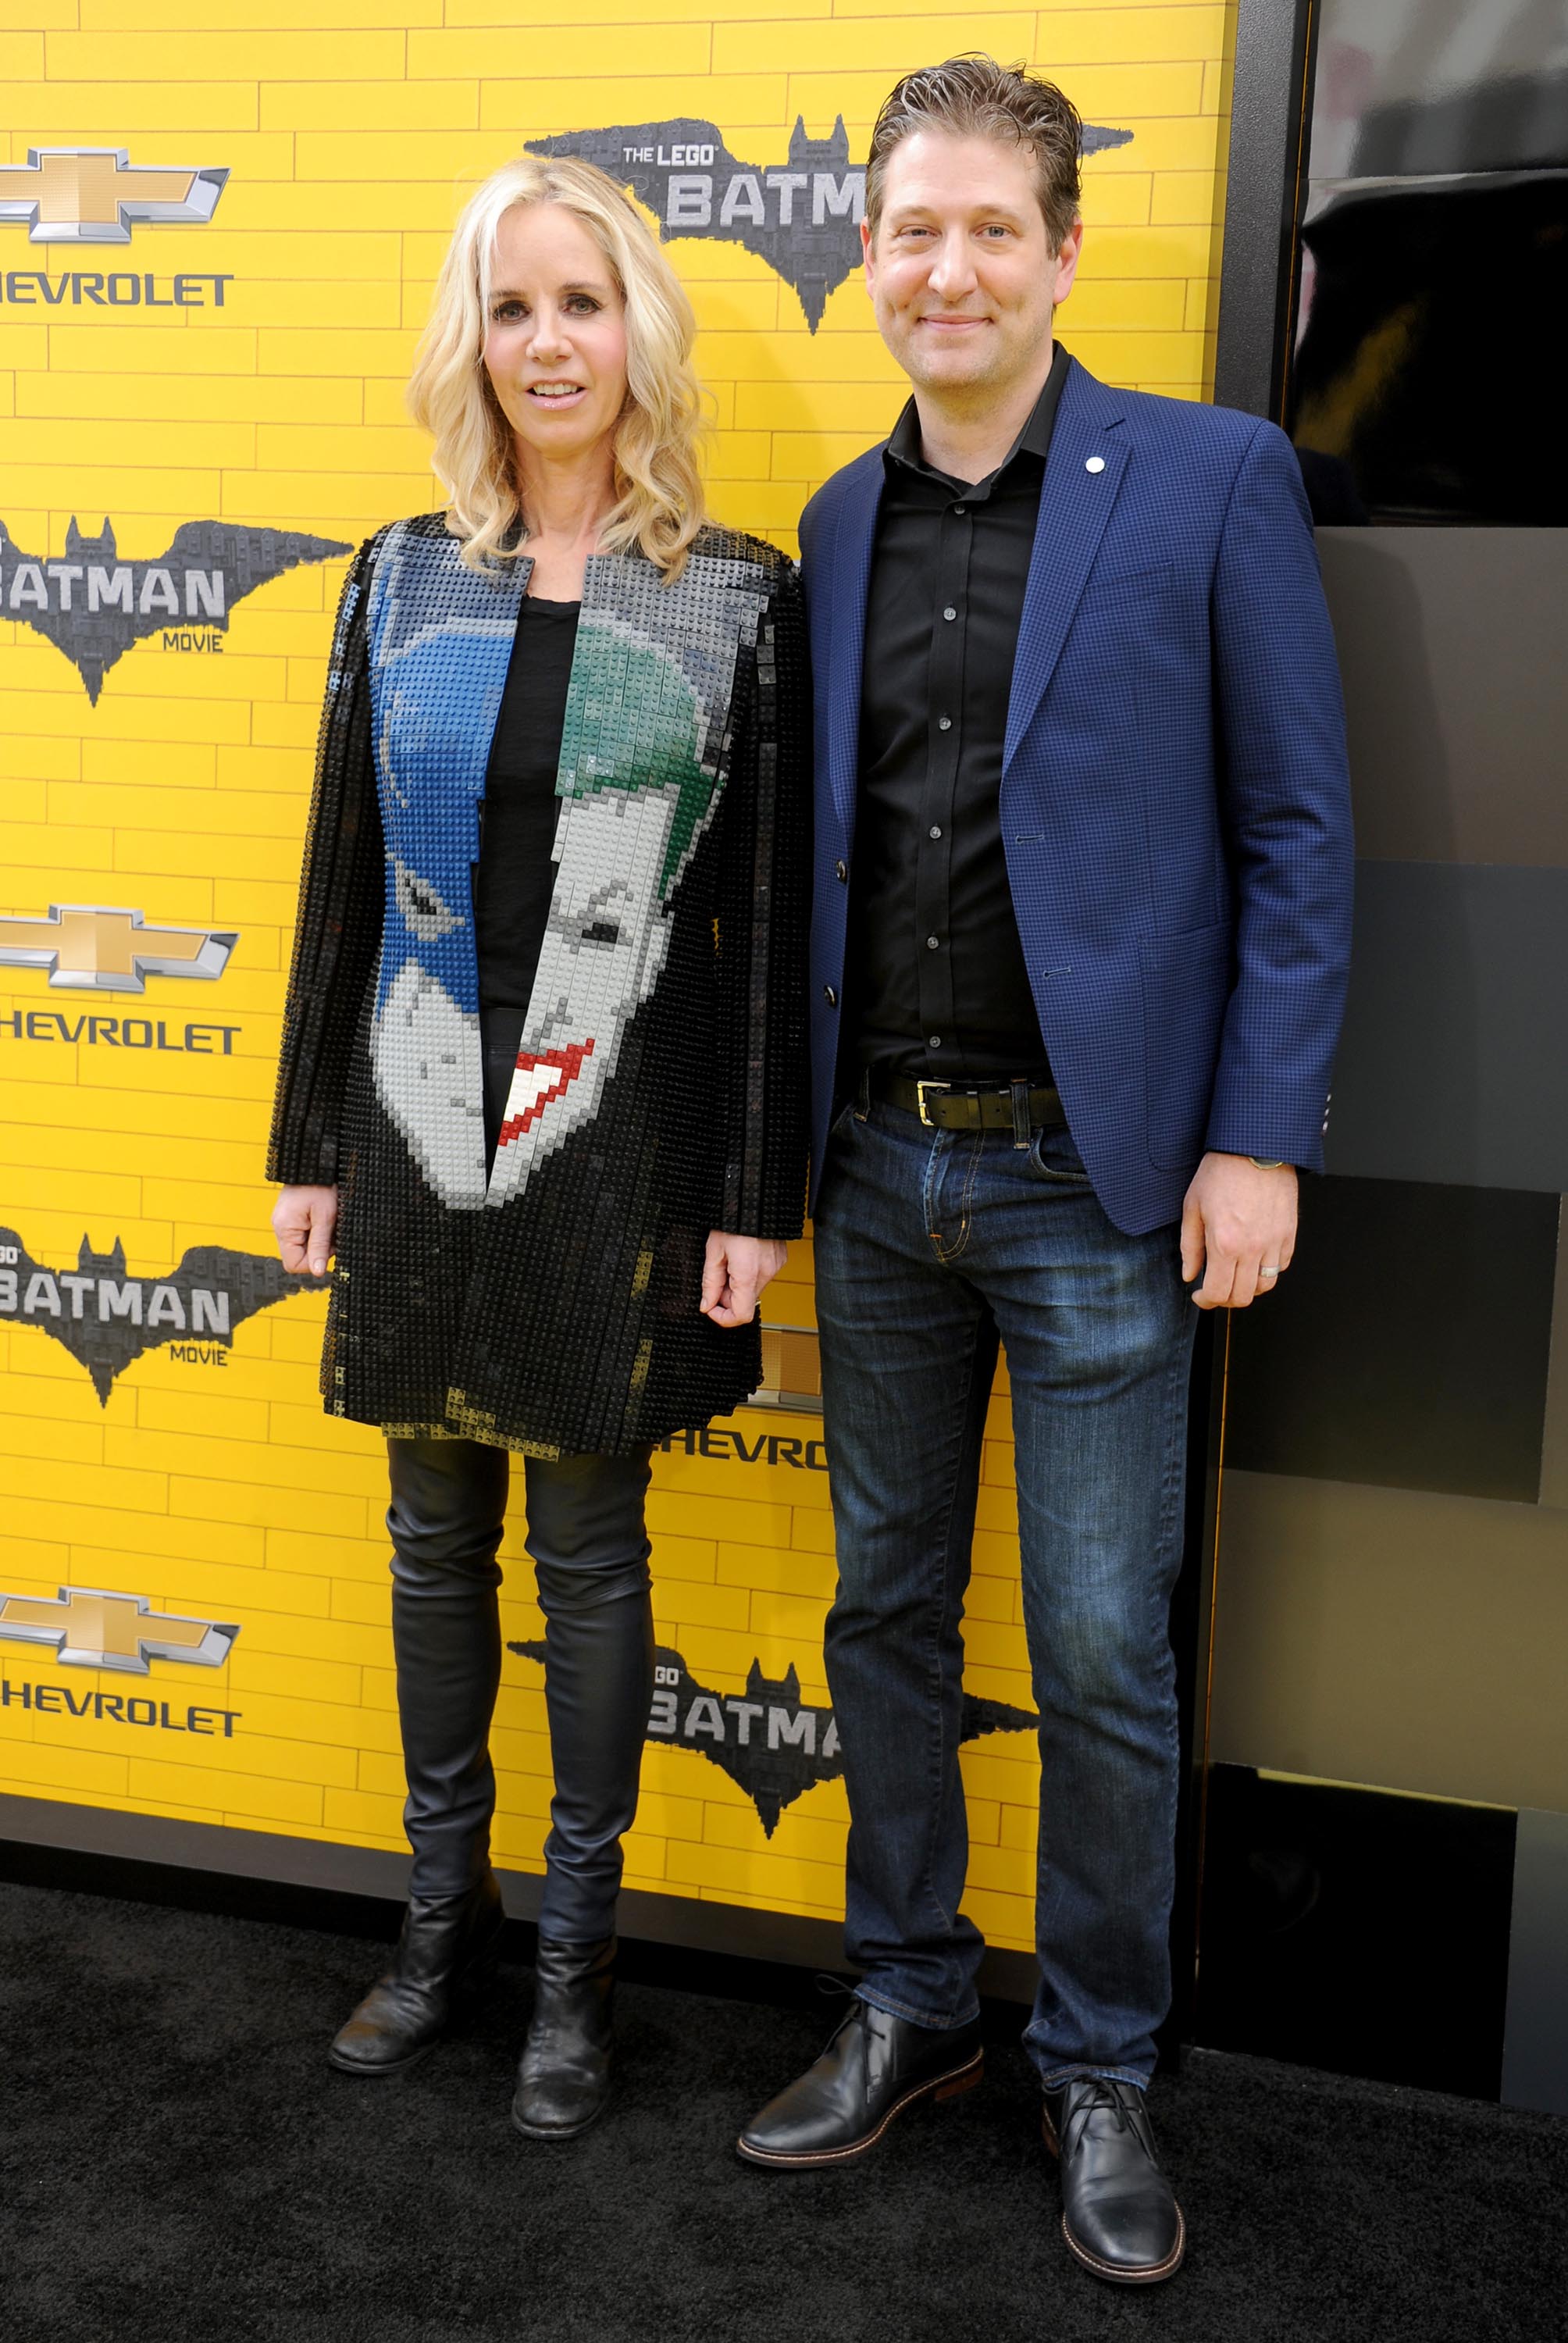 Diane Nelson attends the Premiere of The LEGO Batman Movie